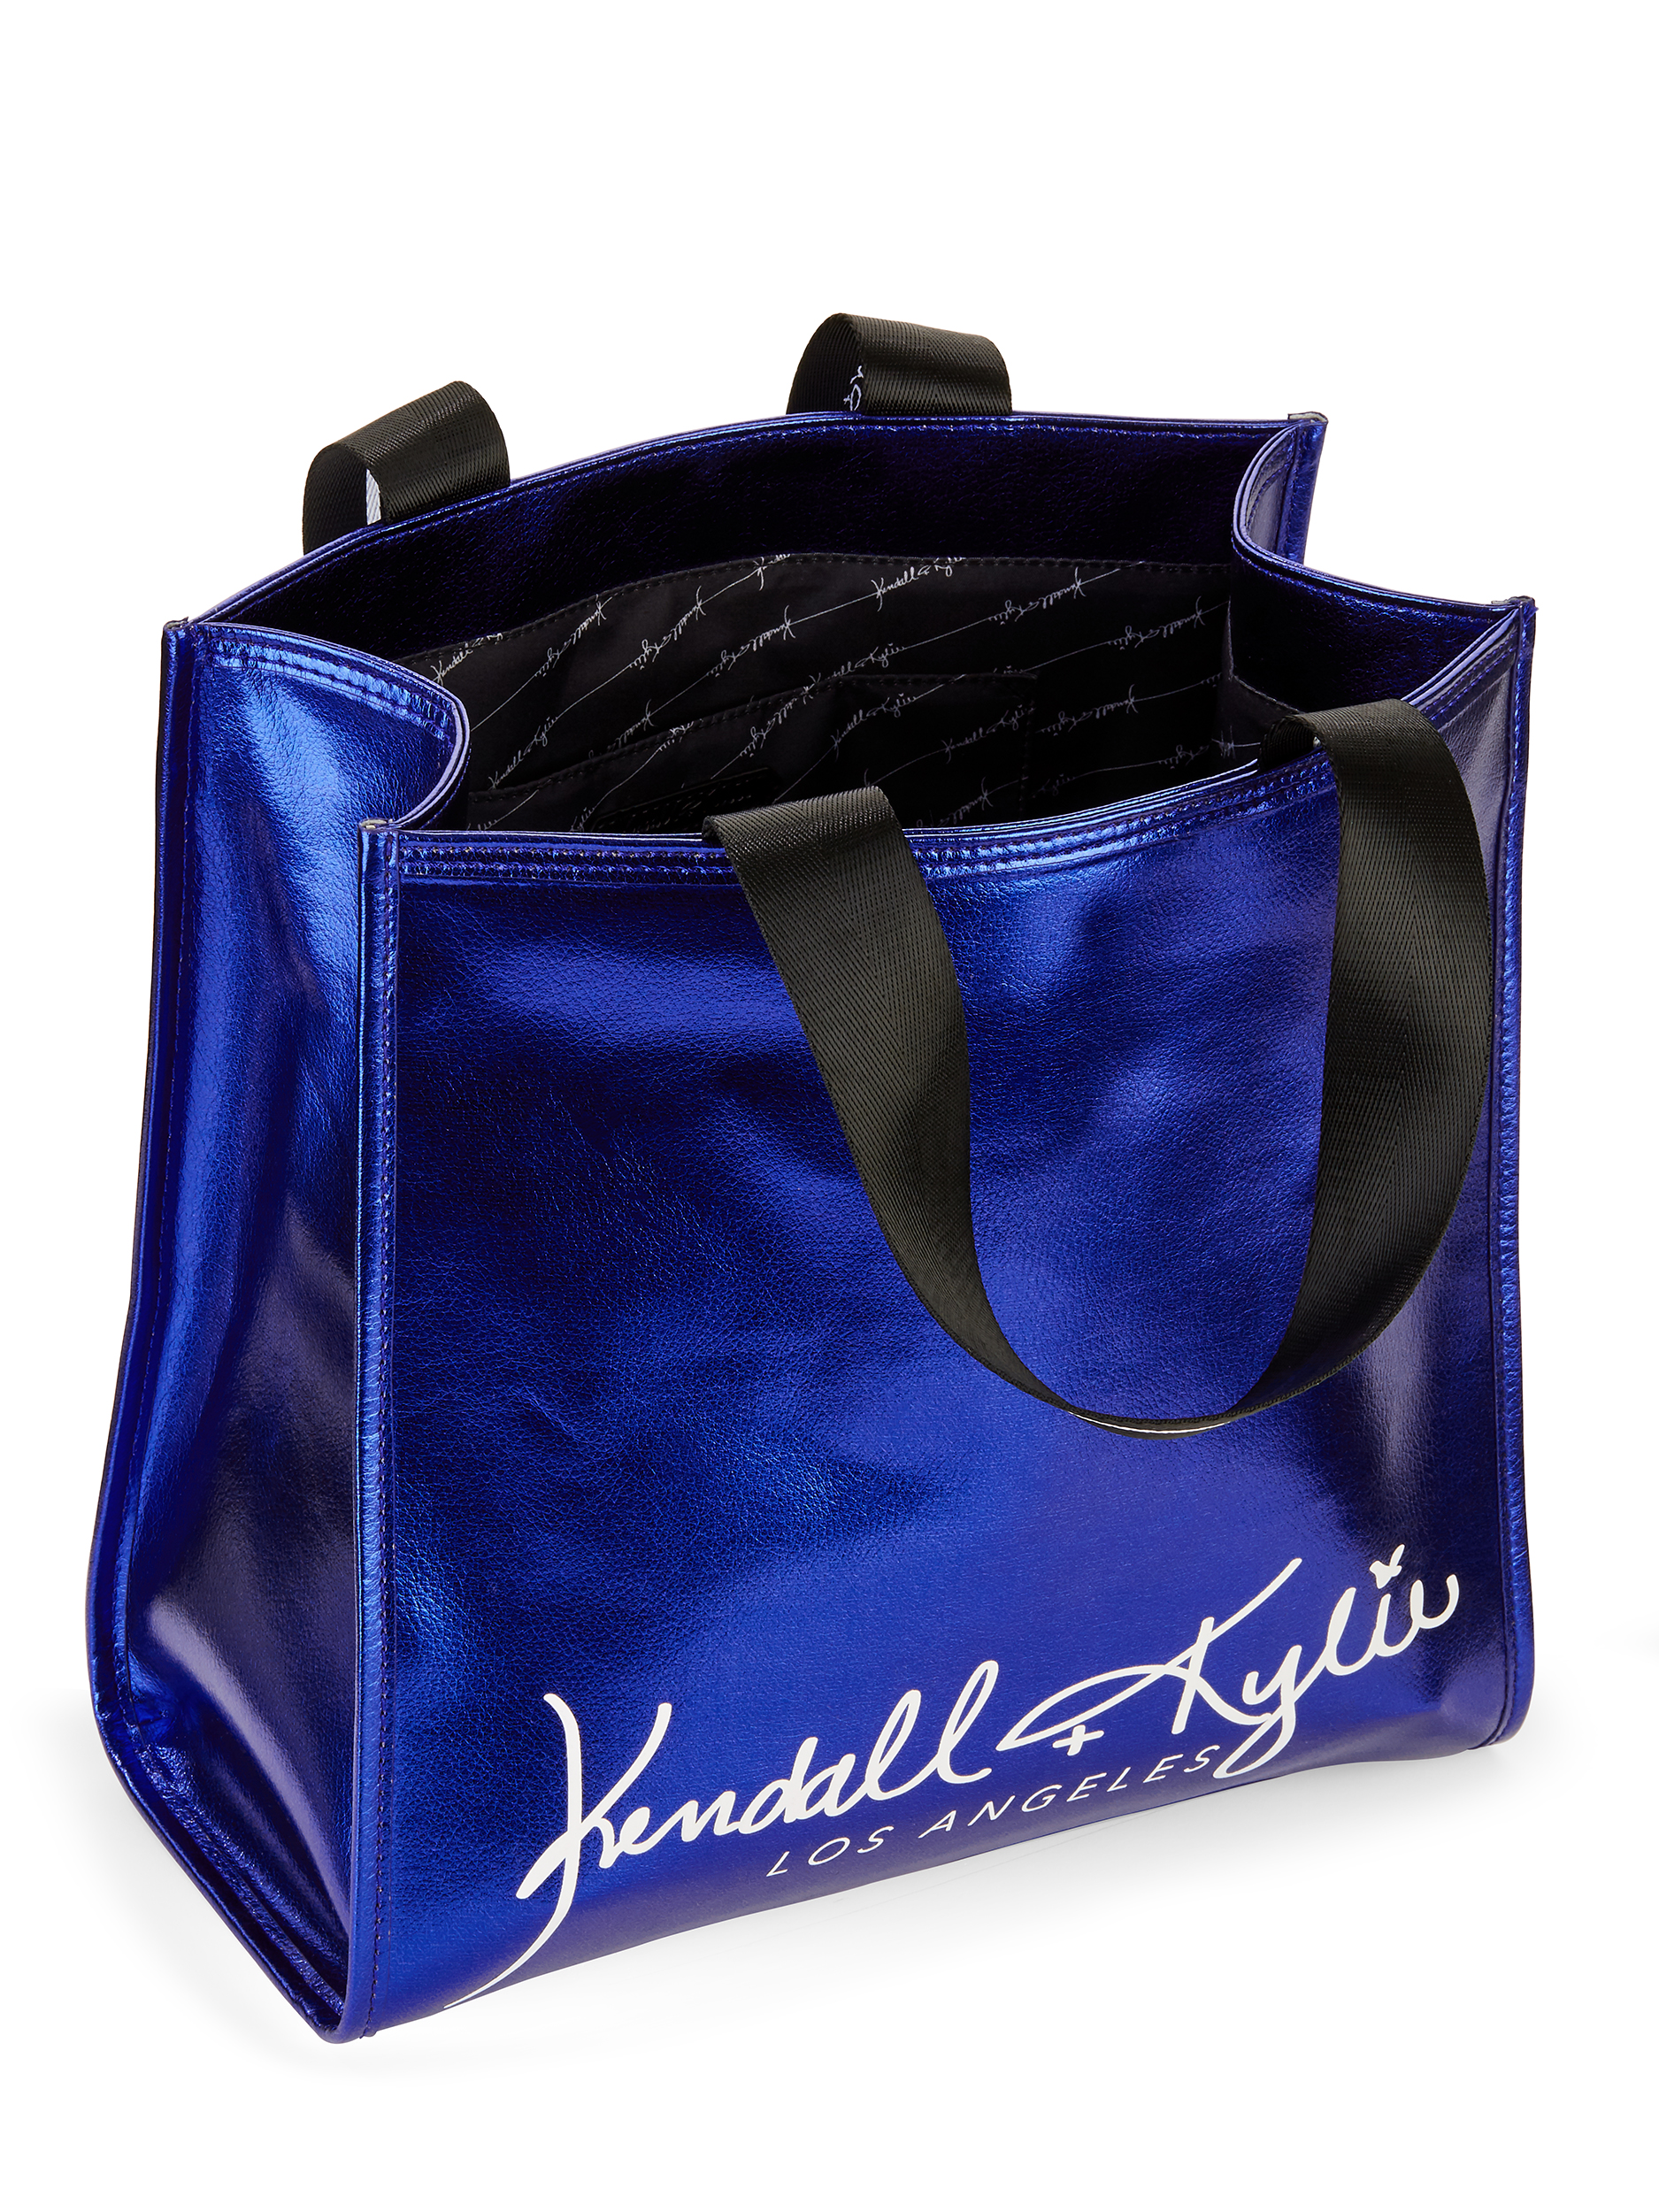 Kendall + Kylie for Walmart Cobalt Tote - image 2 of 5